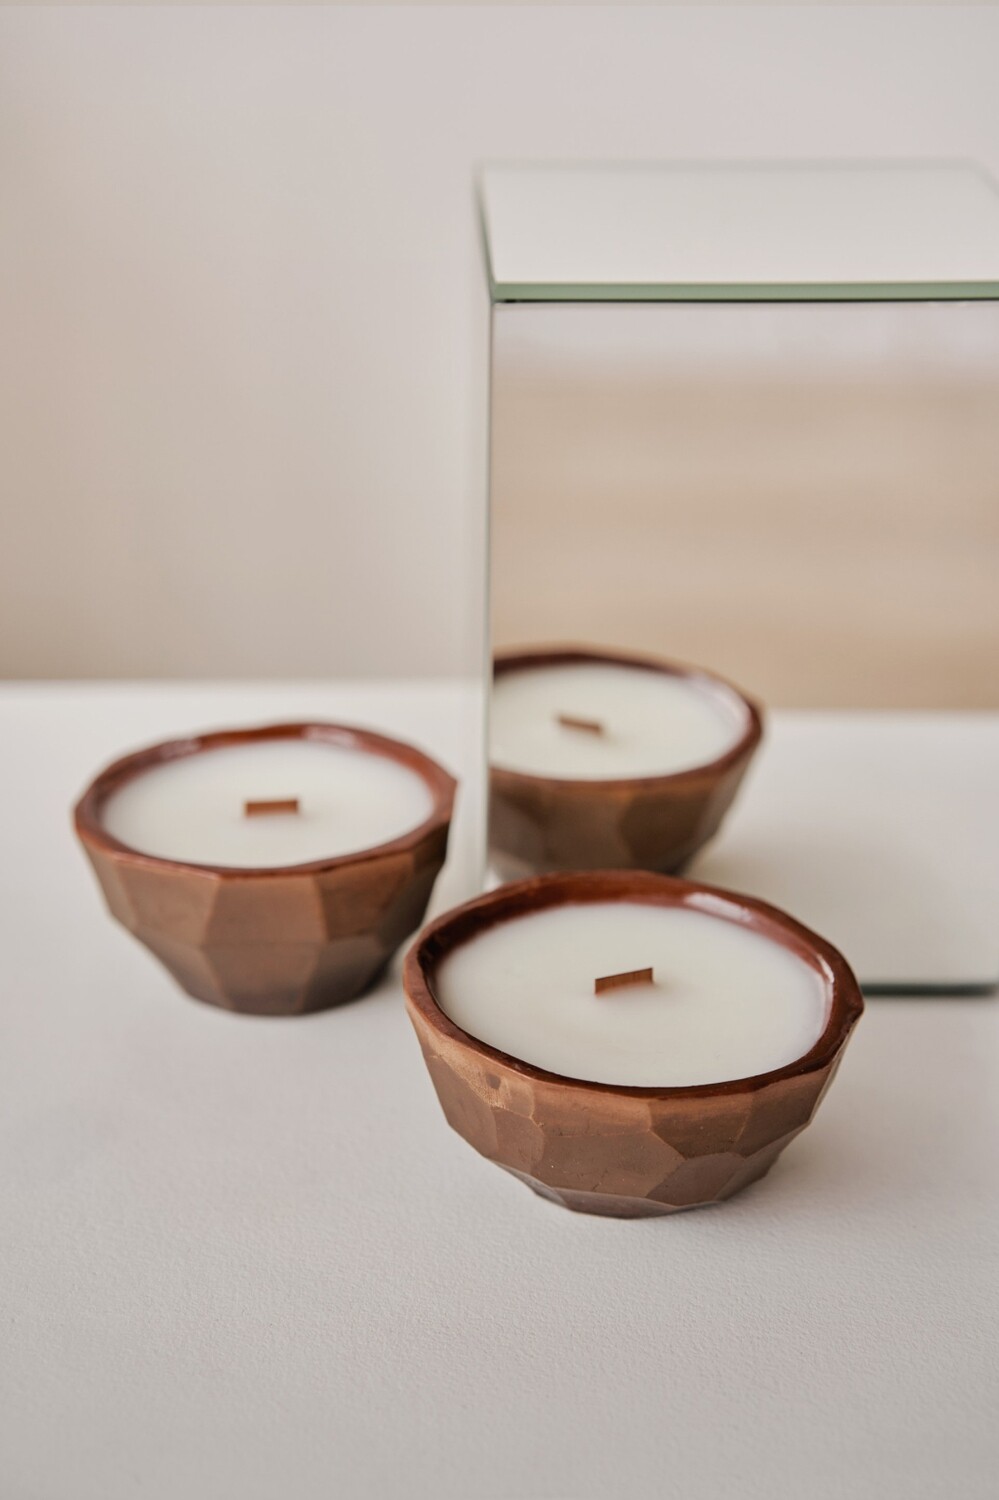 SAMPLE. Soy Candle in Ceramic Vessel